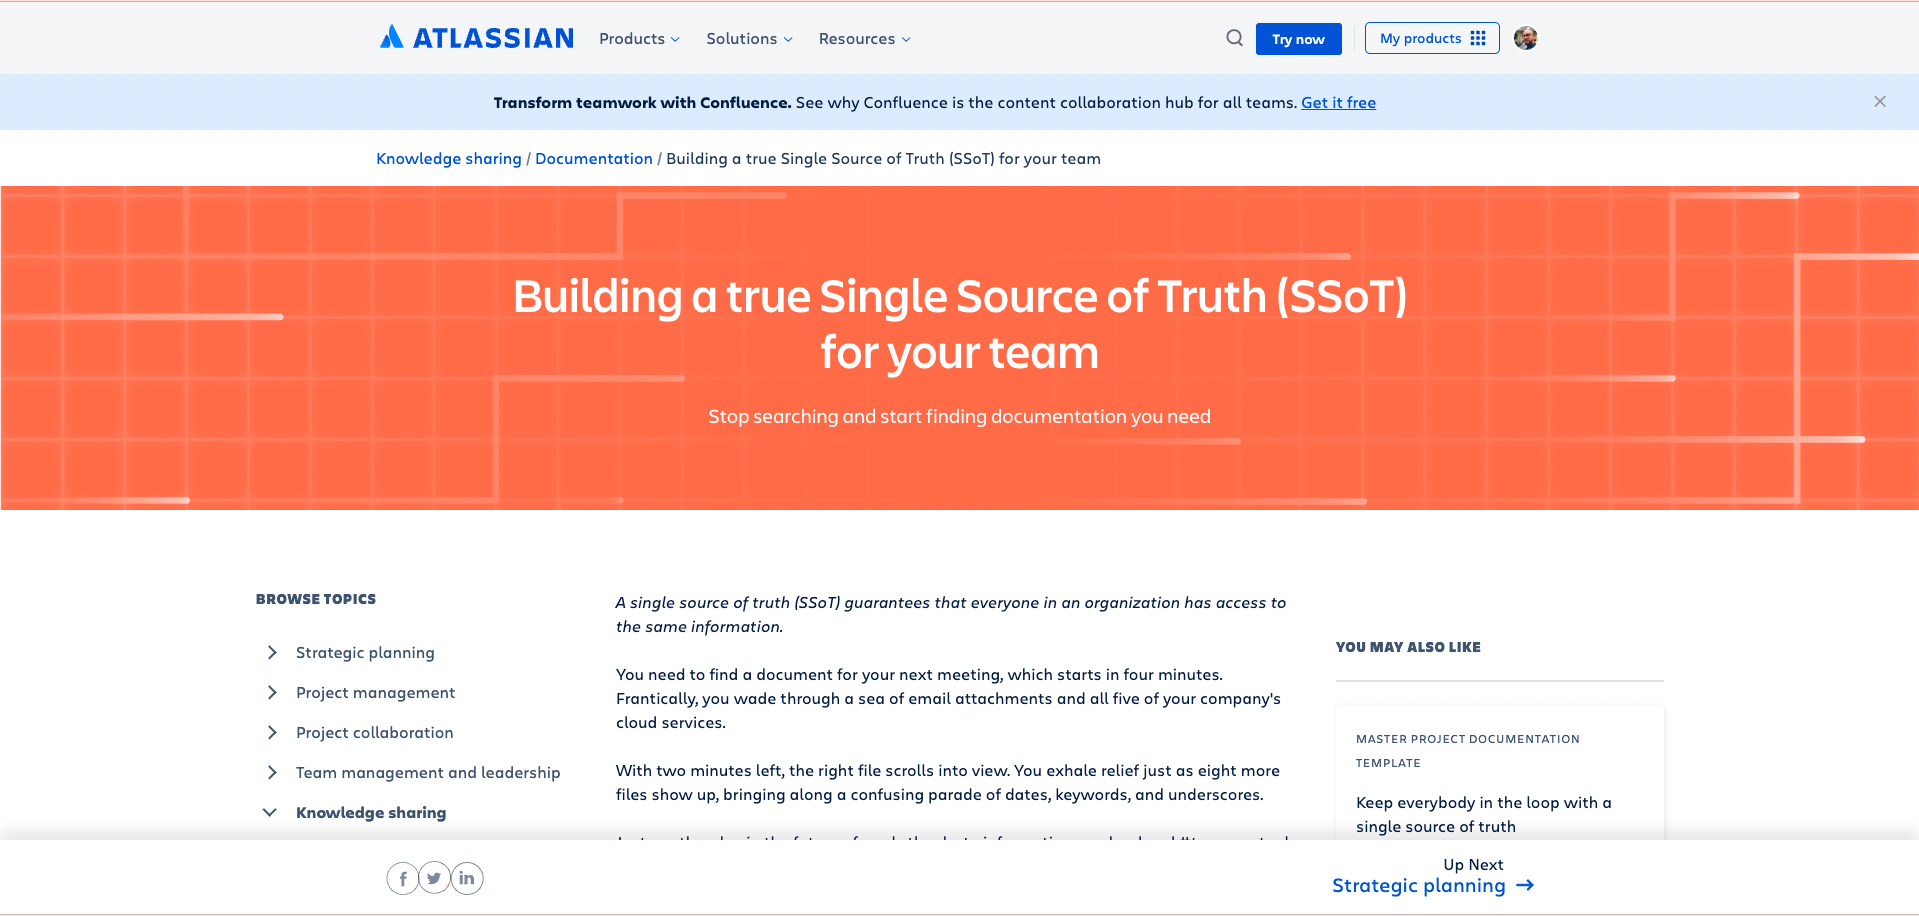 Atlassian's resource on building a Single Source of Truth with Confluence